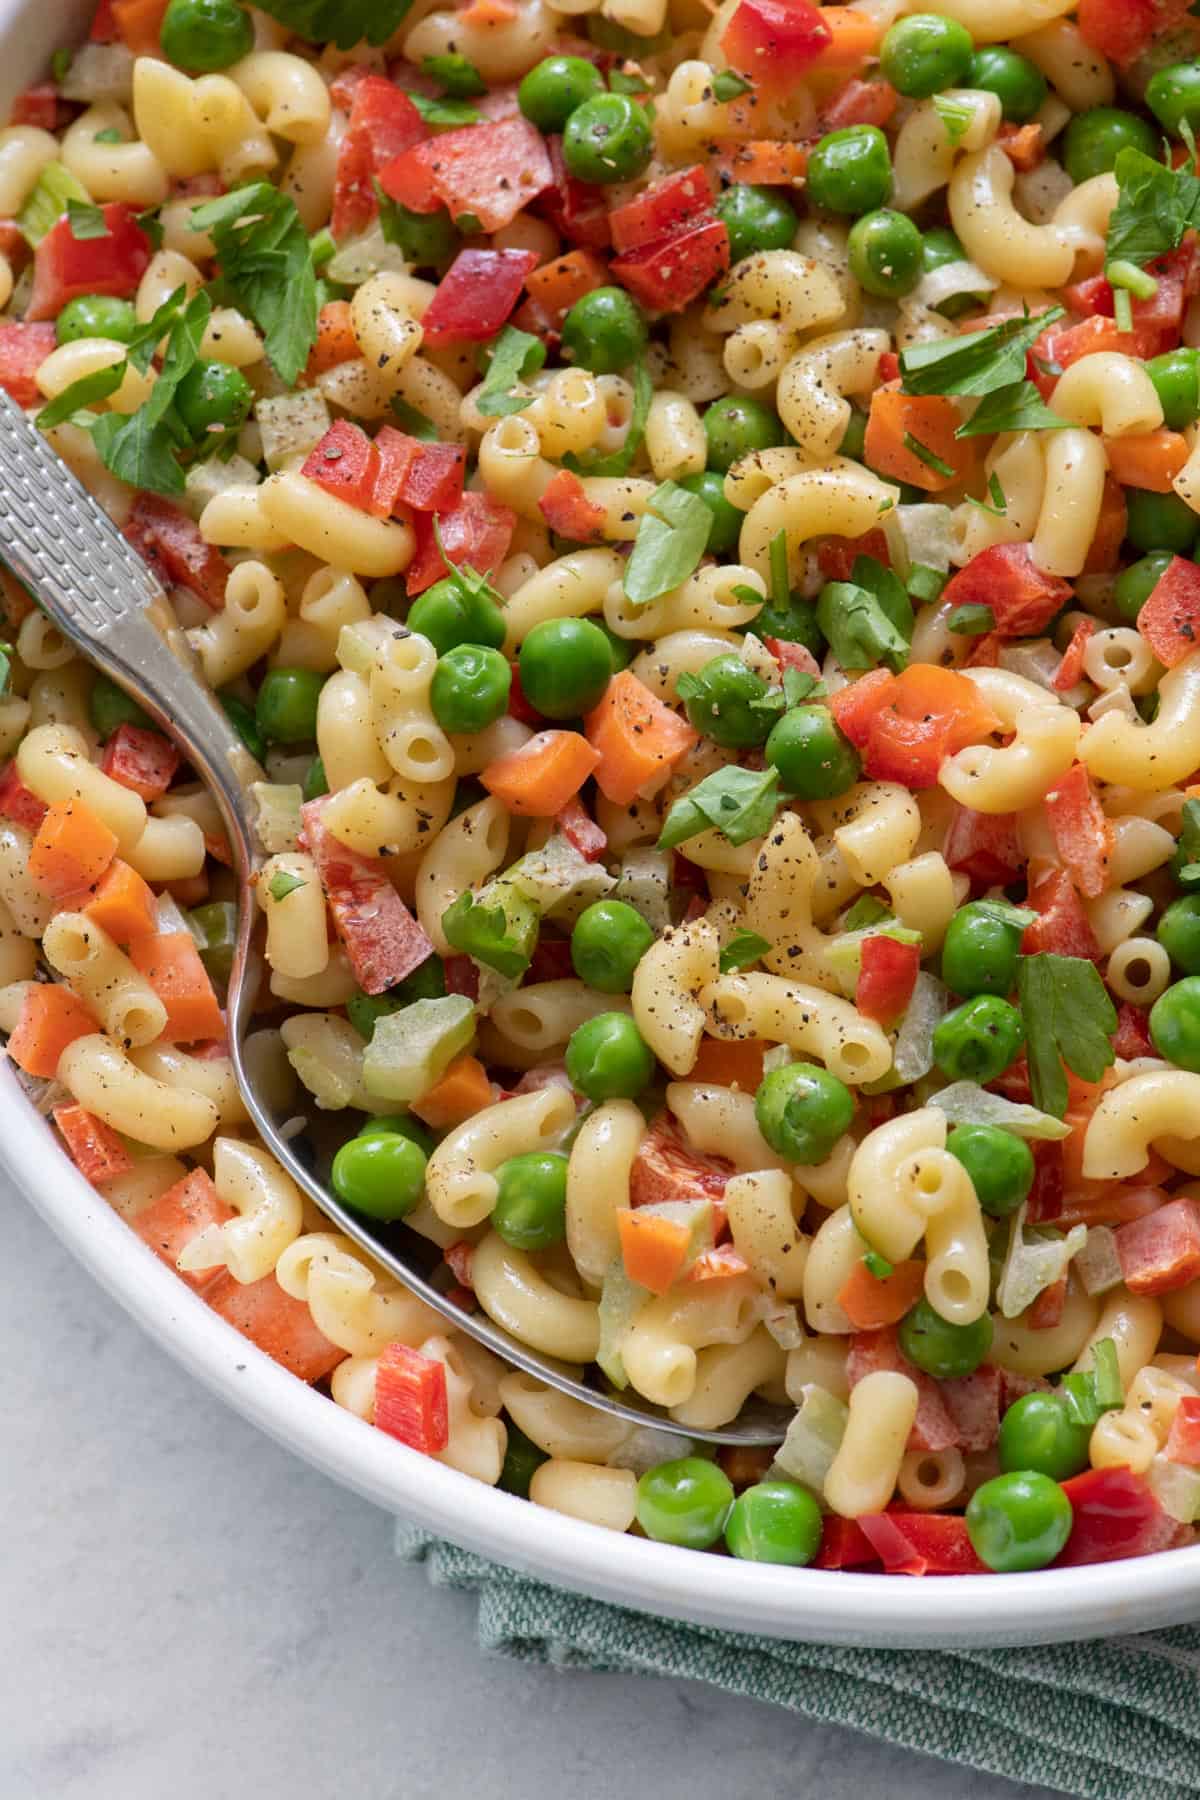 Close up of recipe with spoon dipped into pasta with carrots, peas, celery, and red peppers.